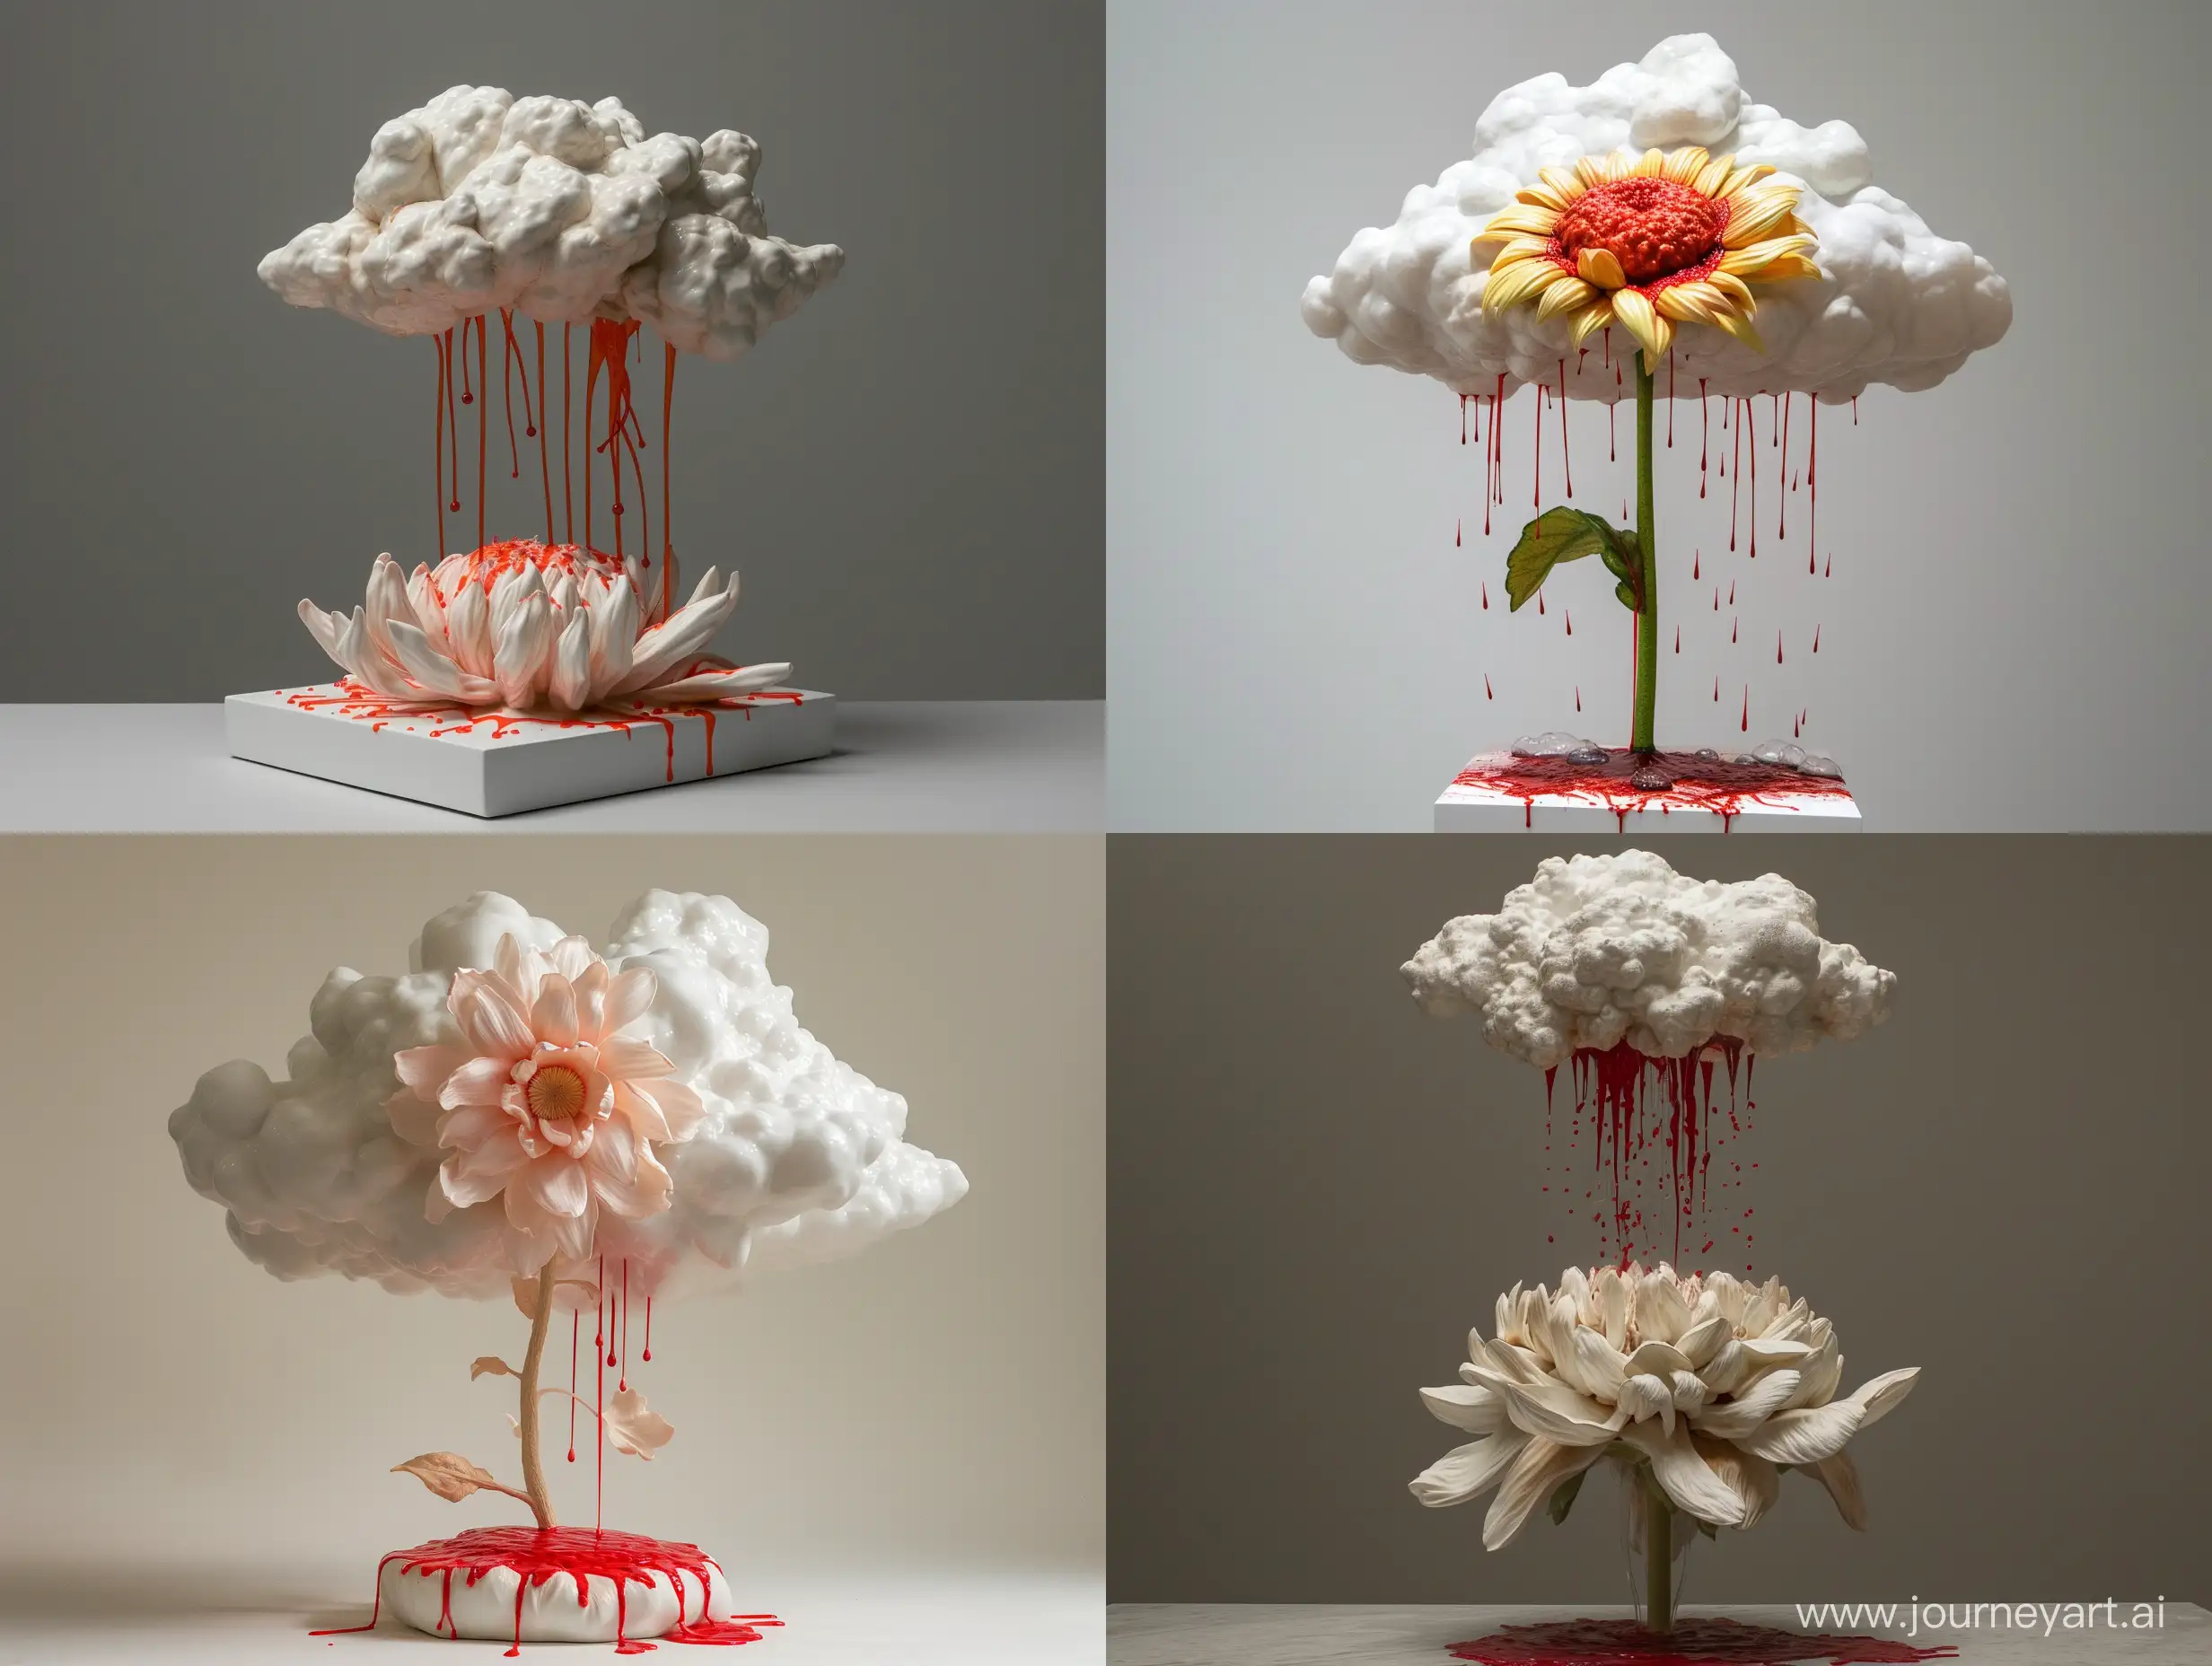 Jeff-Koonsinspired-Photorealistic-Sculpture-Vibrant-Red-Rain-Falling-from-Cloud-above-Flower